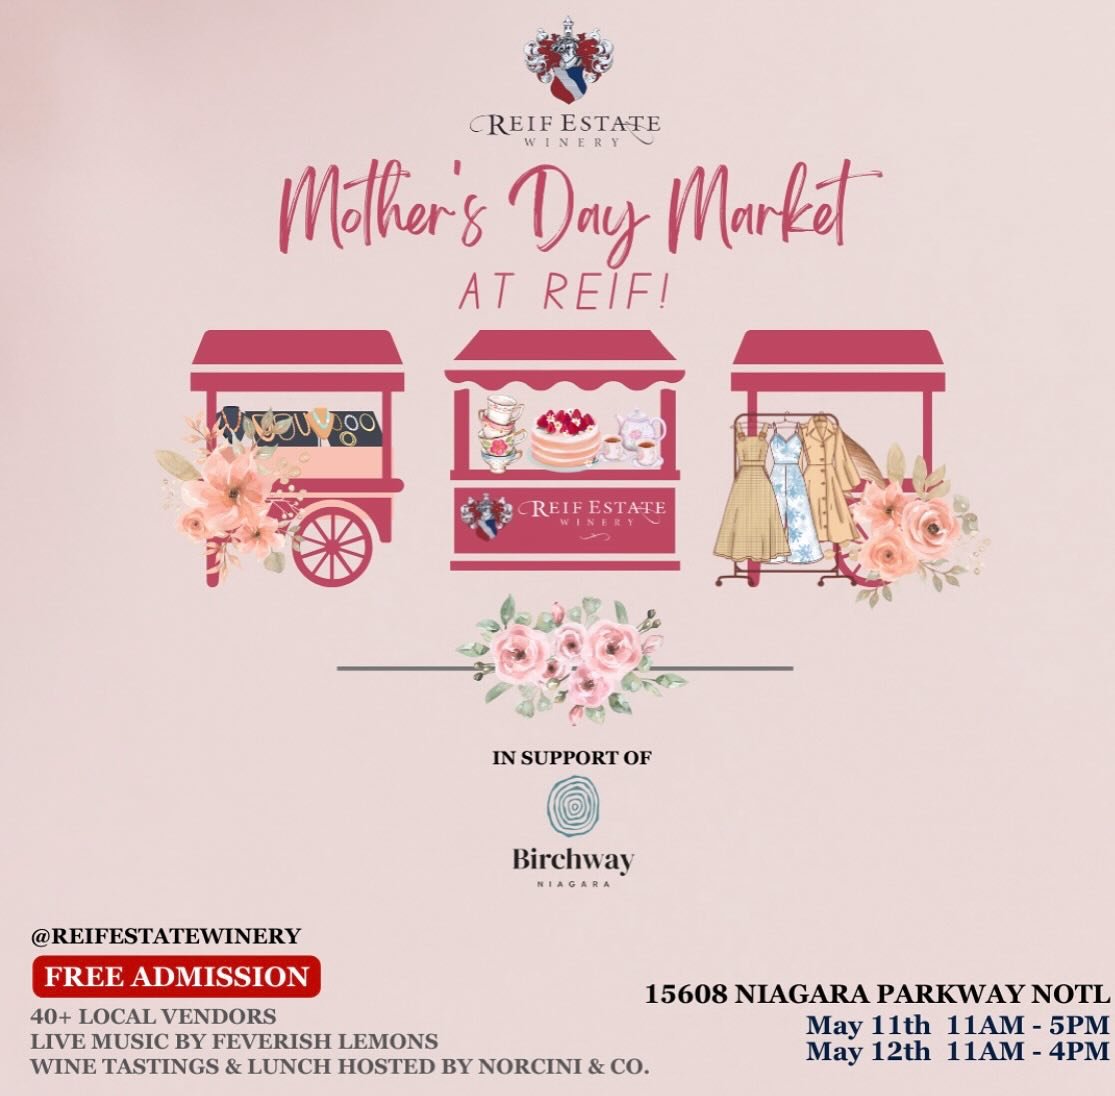 🎉 Exciting news! Find me as a featured vendor at the fabulous Mother&rsquo;s Day Market hosted by @reifestatewinery! 🌸✨ Dive into a weekend of delights with wine tastings, scrumptious lunch, and live music! Admission is free, so bring Mom and join 